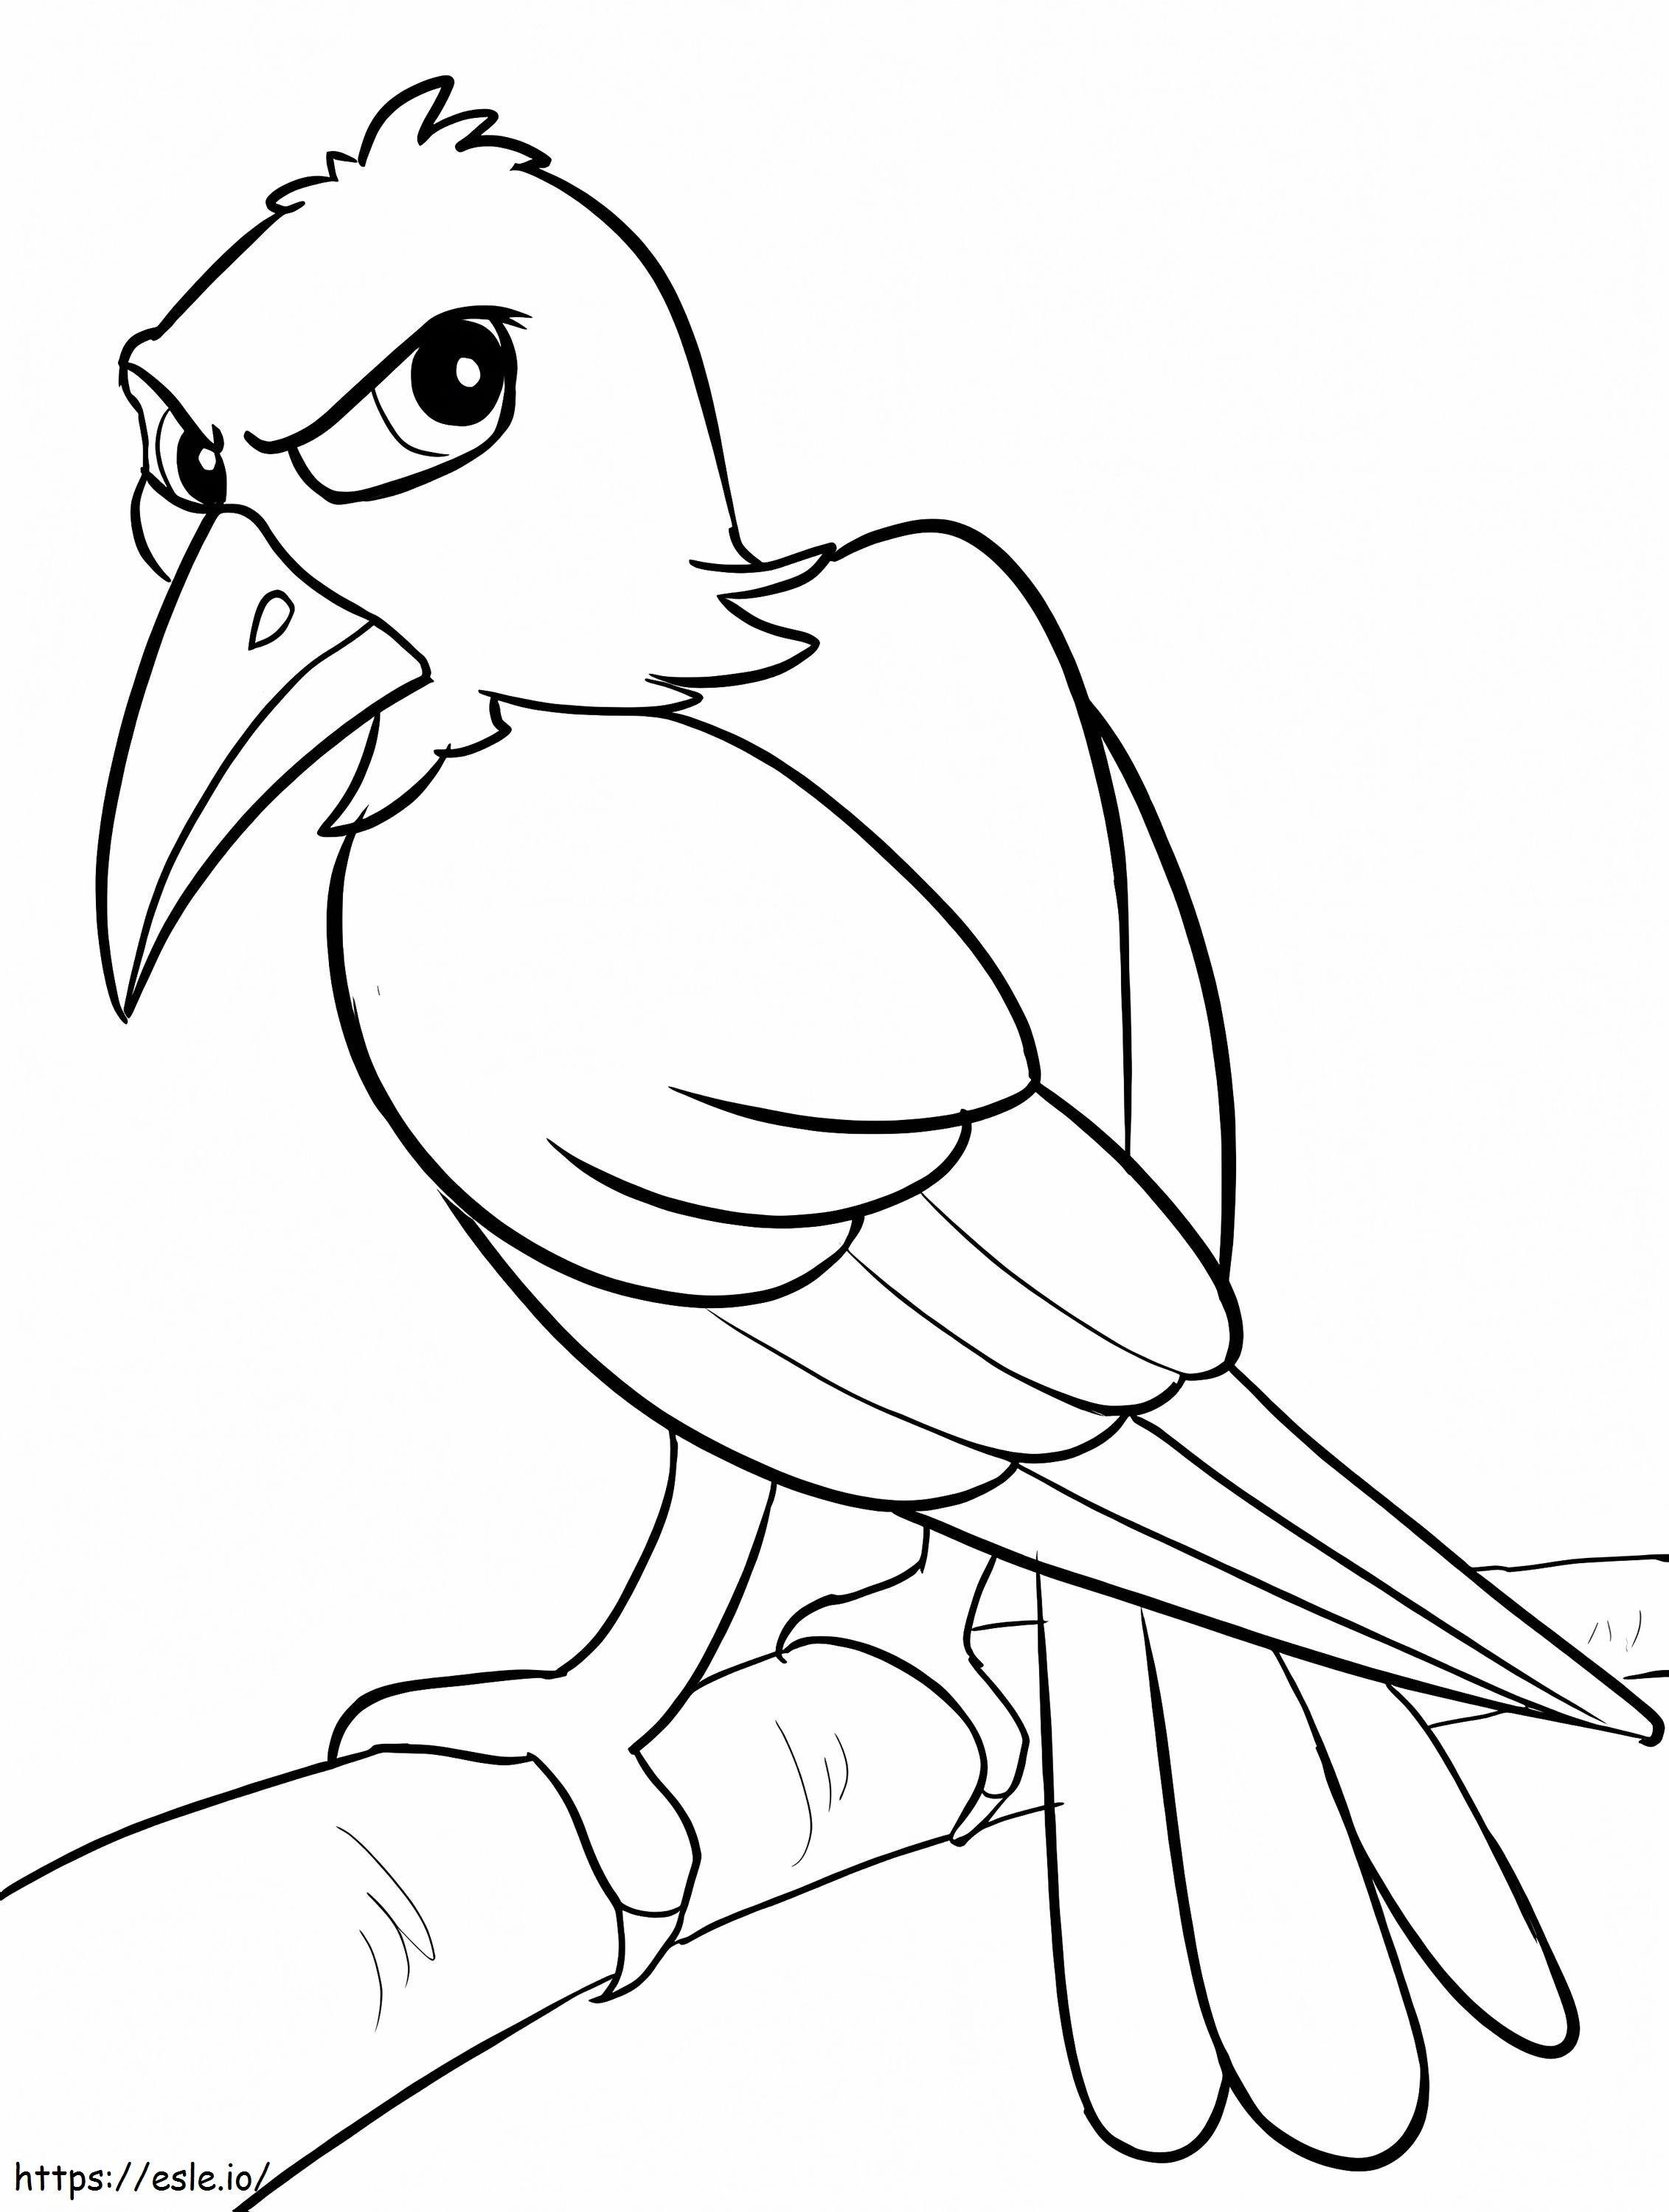 Angry Raven coloring page